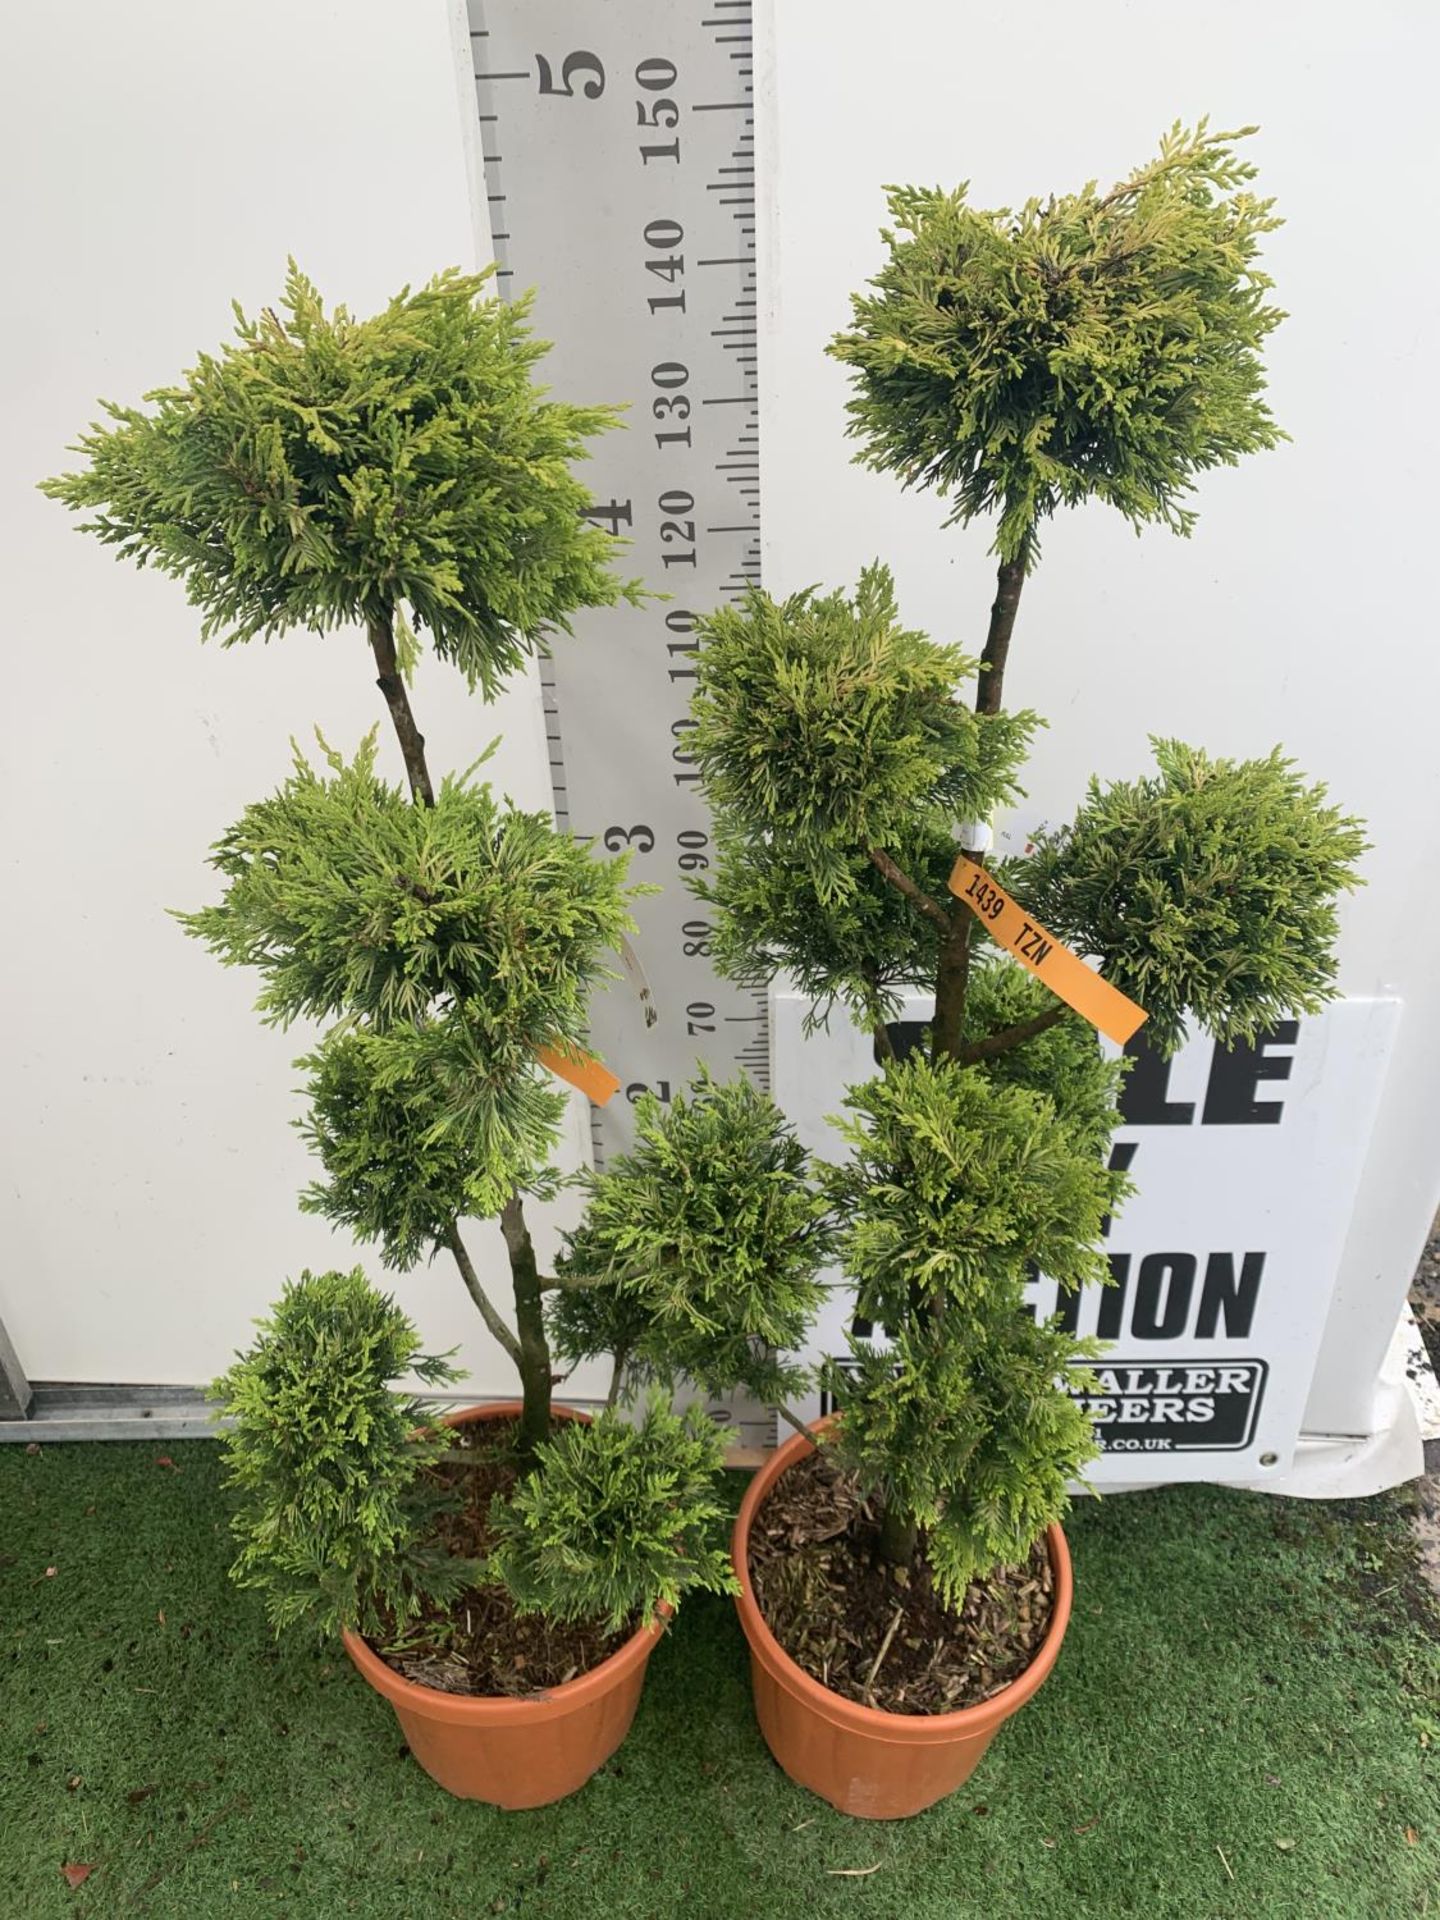 TWO POM POM TREES CUPRESSOCYPARIS LEYLANDII 'GOLD RIDER' APPROX 160CM IN HEIGHT IN 15 LTR POTS - Image 2 of 5